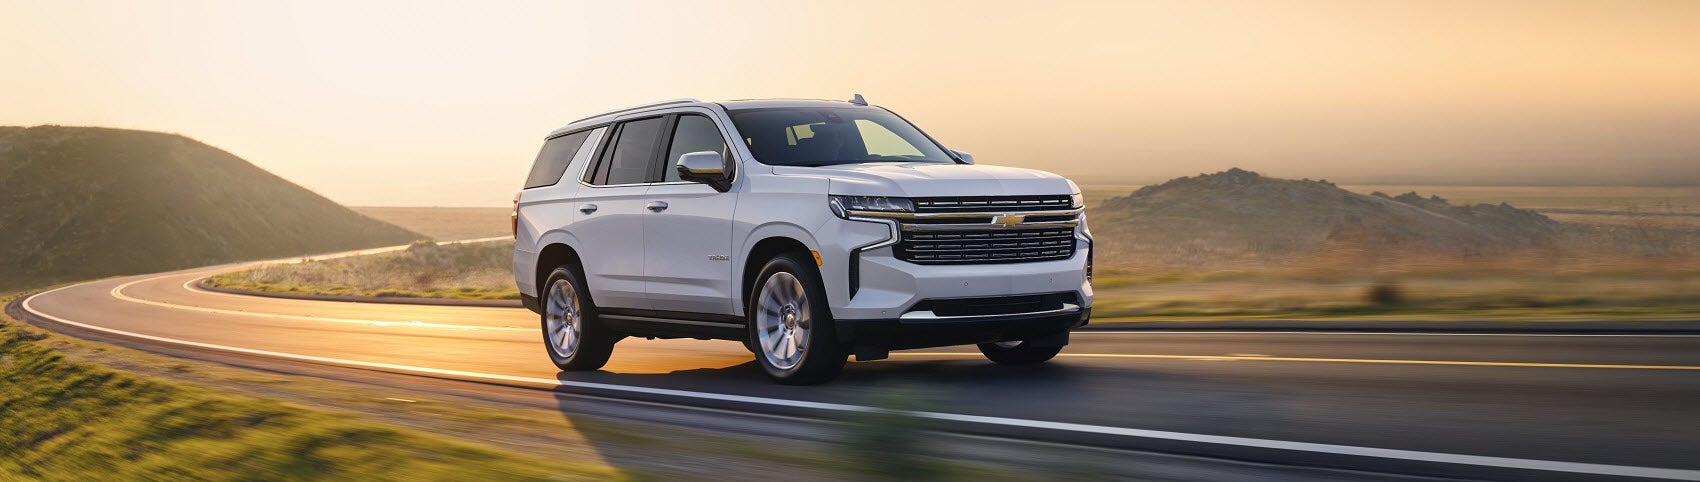 2021 Chevy Tahoe Driving